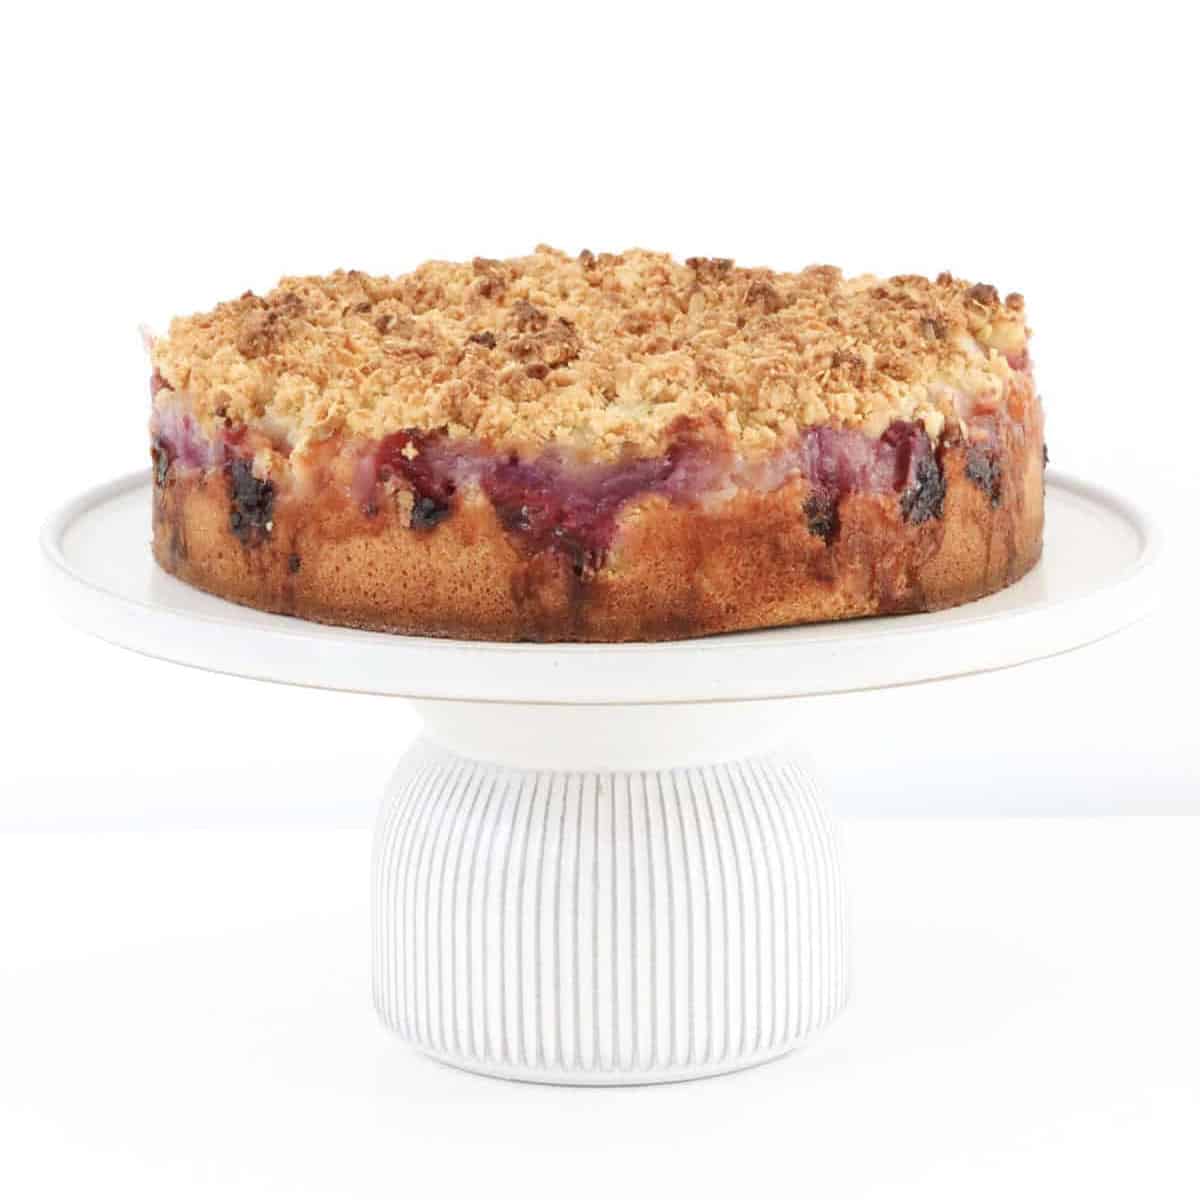 A raspberry crumble cake with apple on a cake plate.